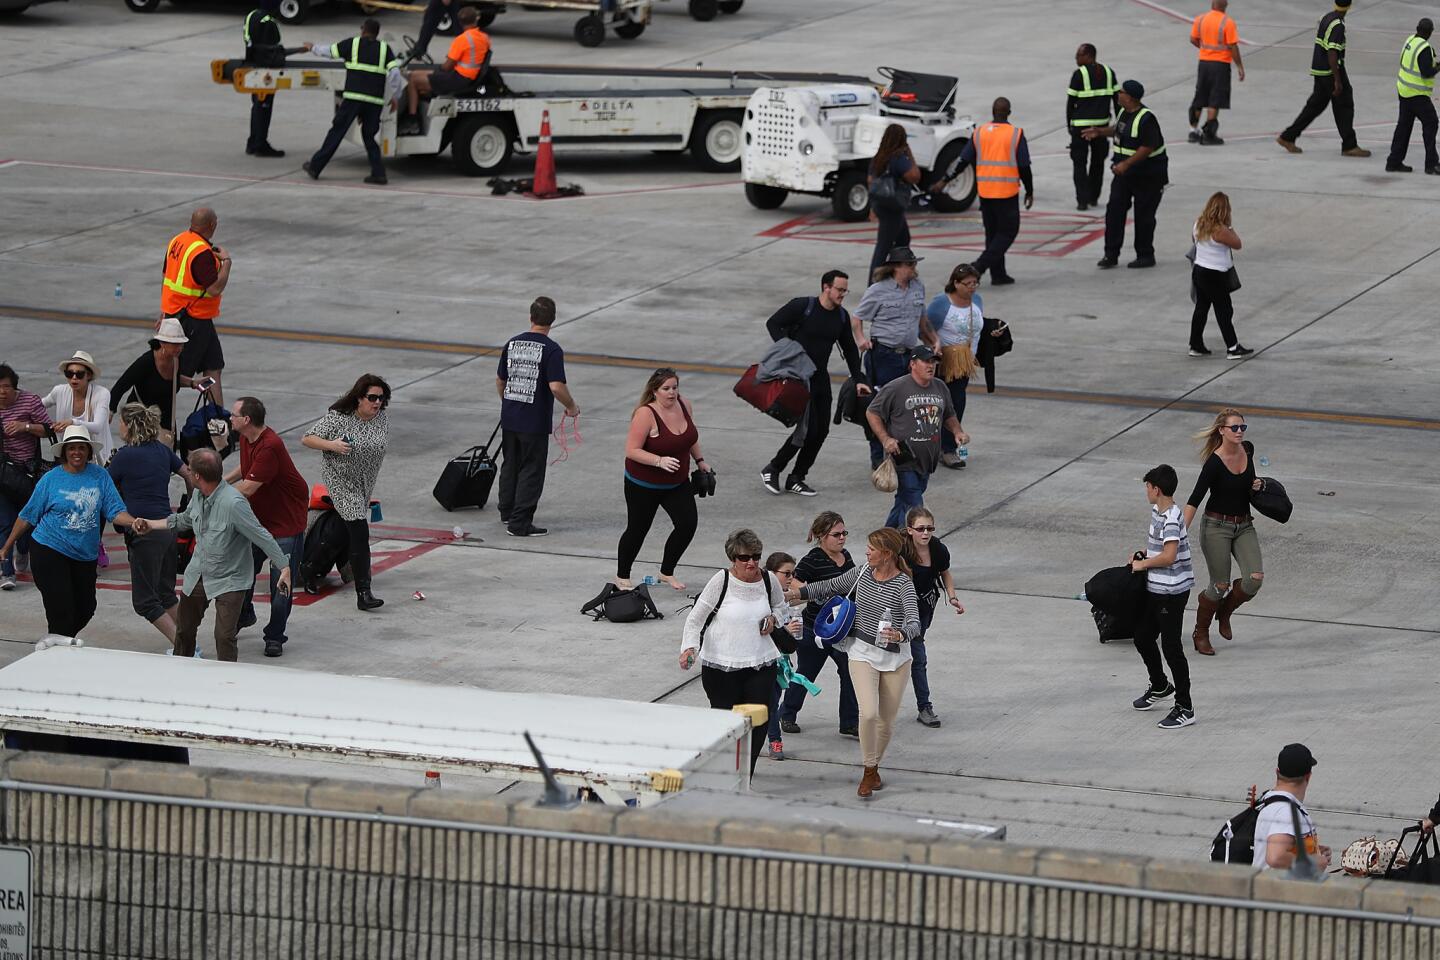 People seek cover on the tarmac of Fort Lauderdale-Hollywood International Airport after a shooting took place near the baggage claim.